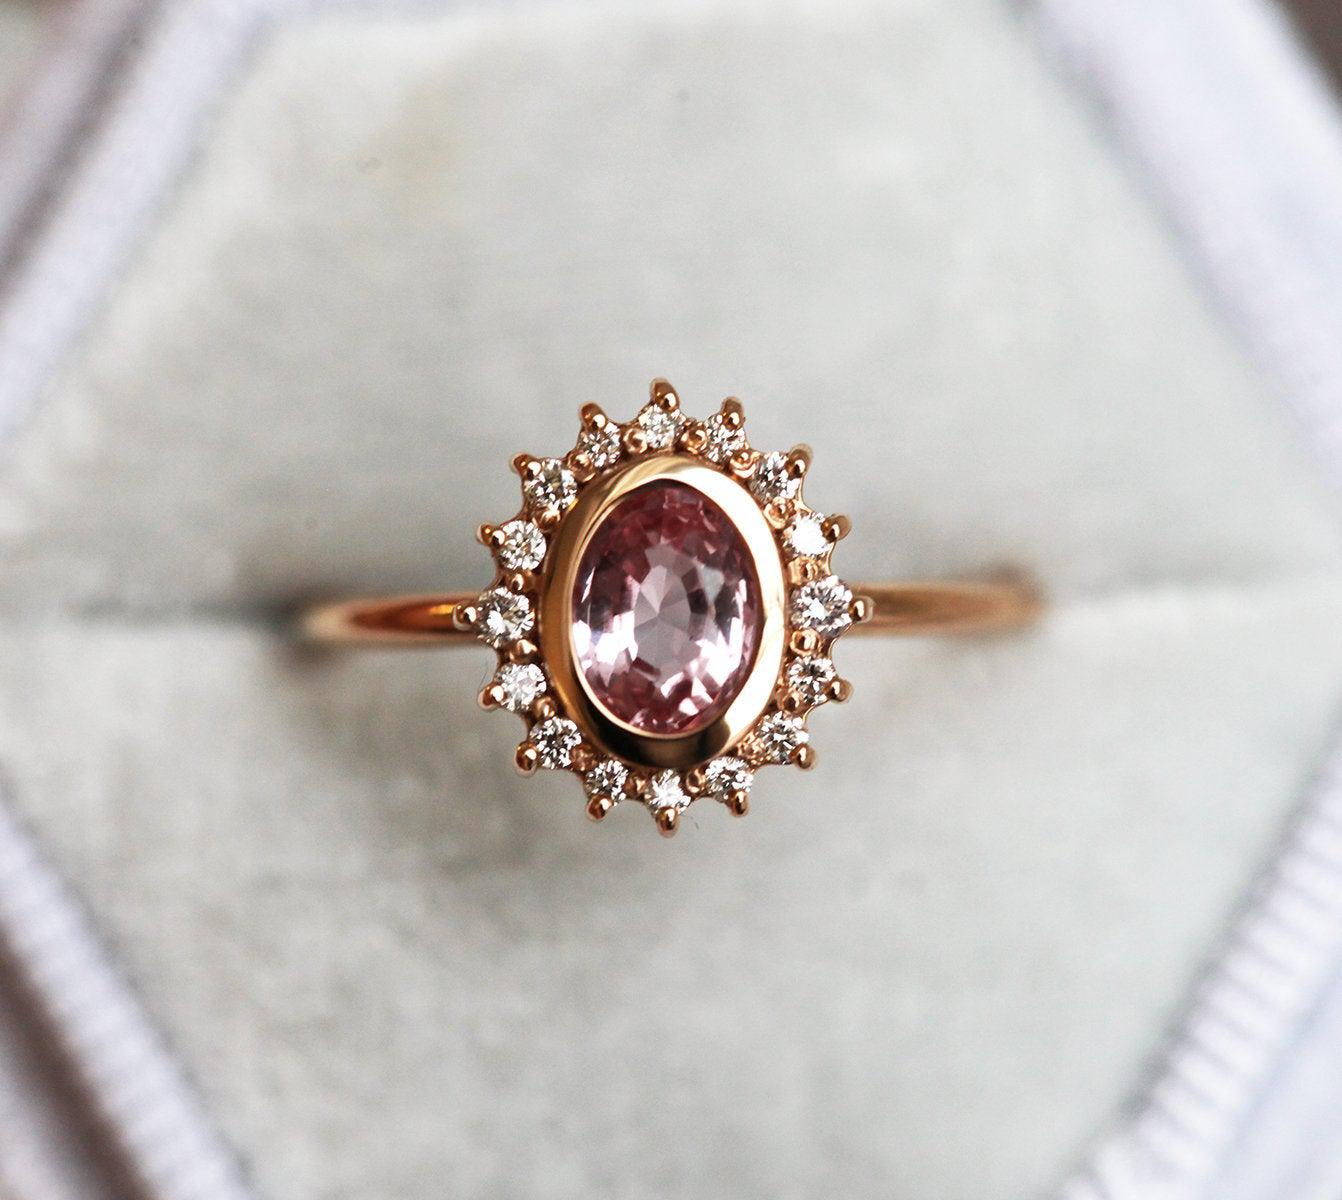 Pink oval-shaped sapphire halo ring with side diamonds